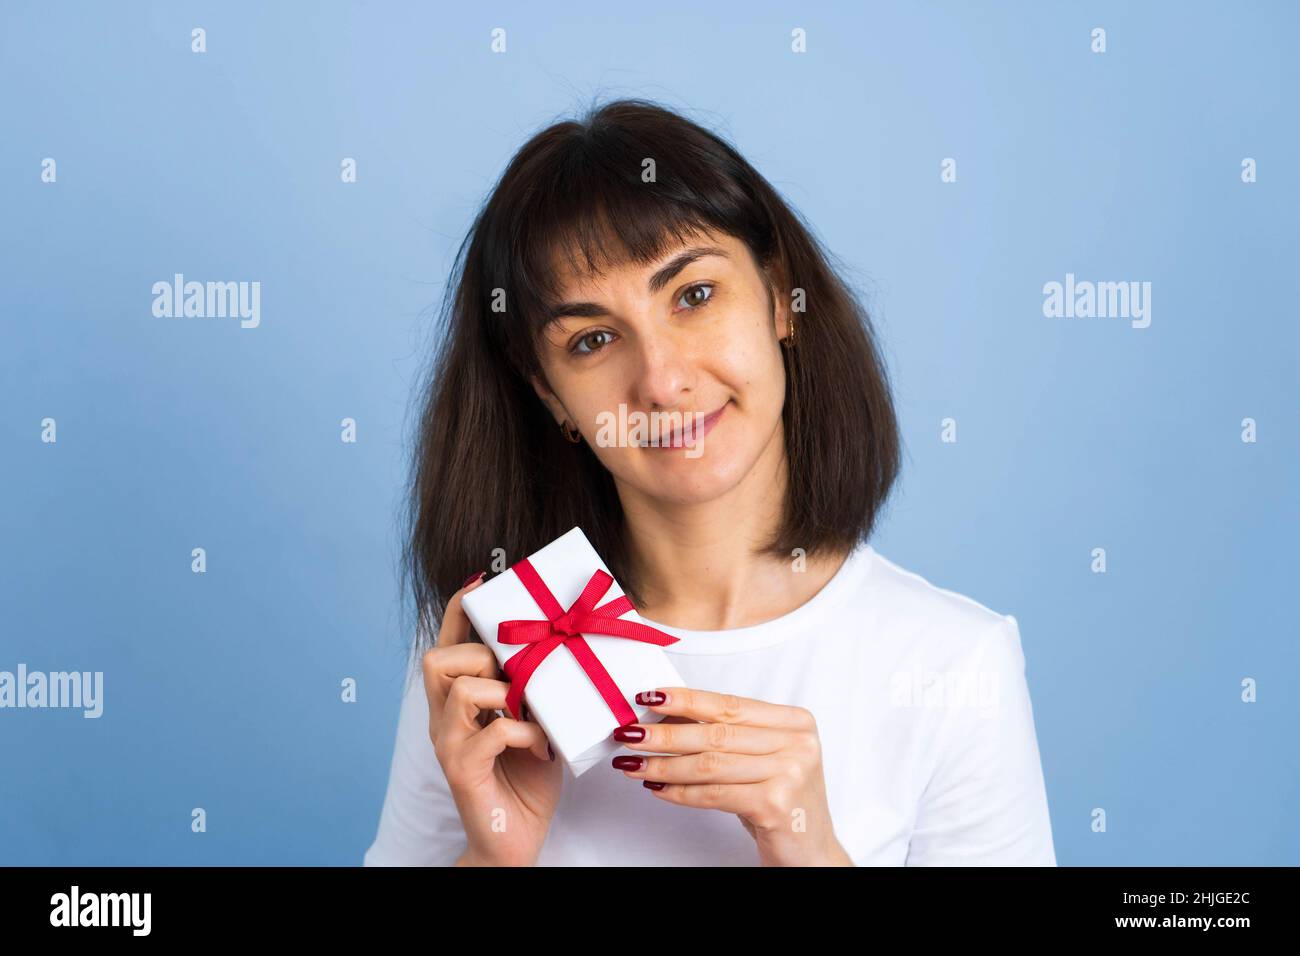 Smiling happy woman holding gift box isolated on blue background. Valentines day or birthday concept Stock Photo